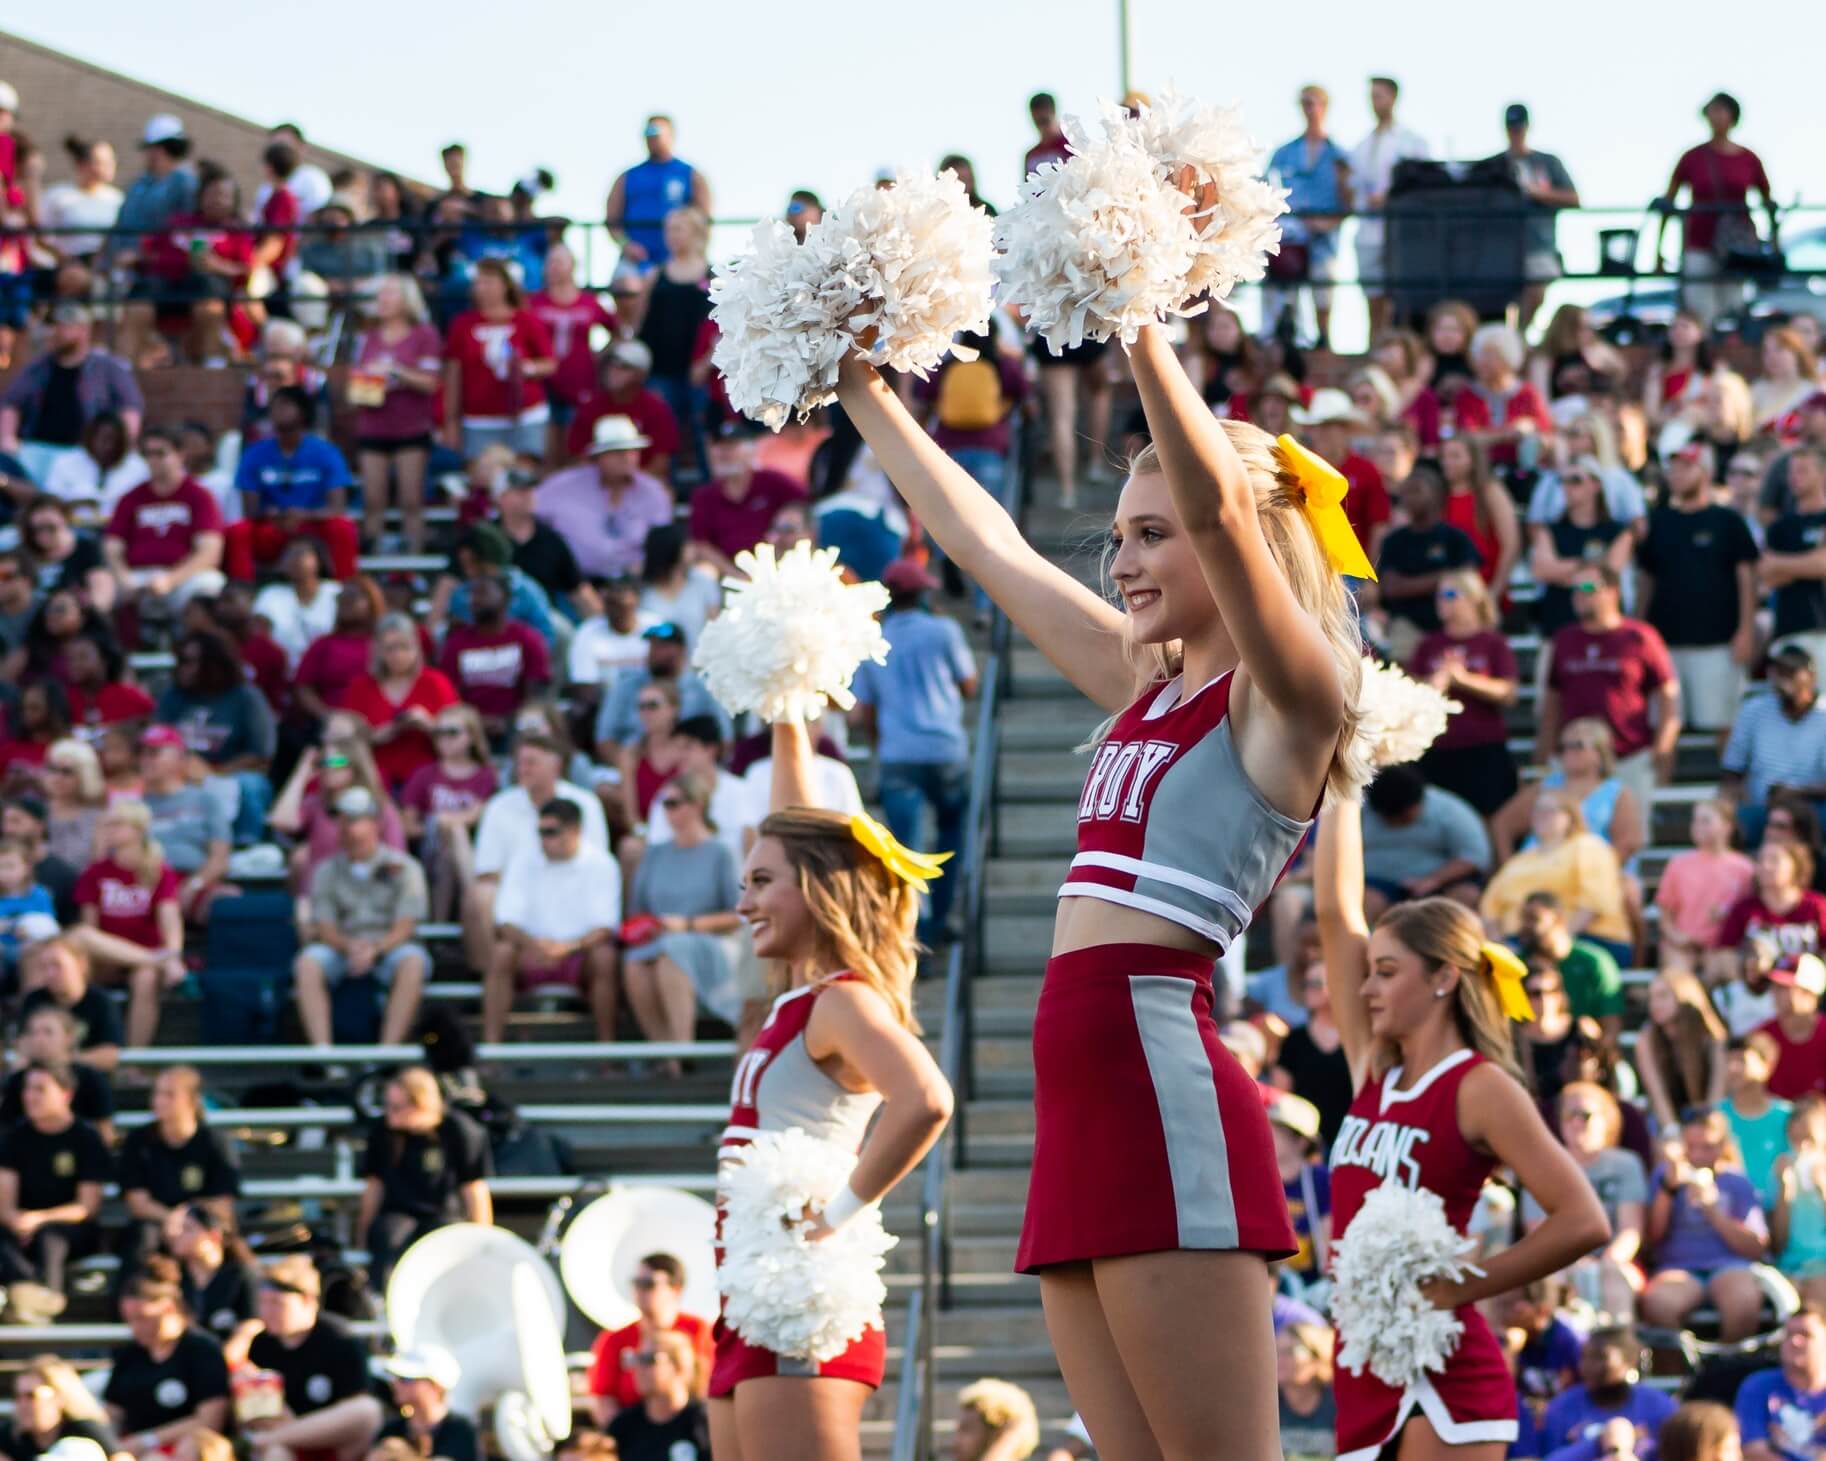 Cheerleaders wave pom-poms at a sports game